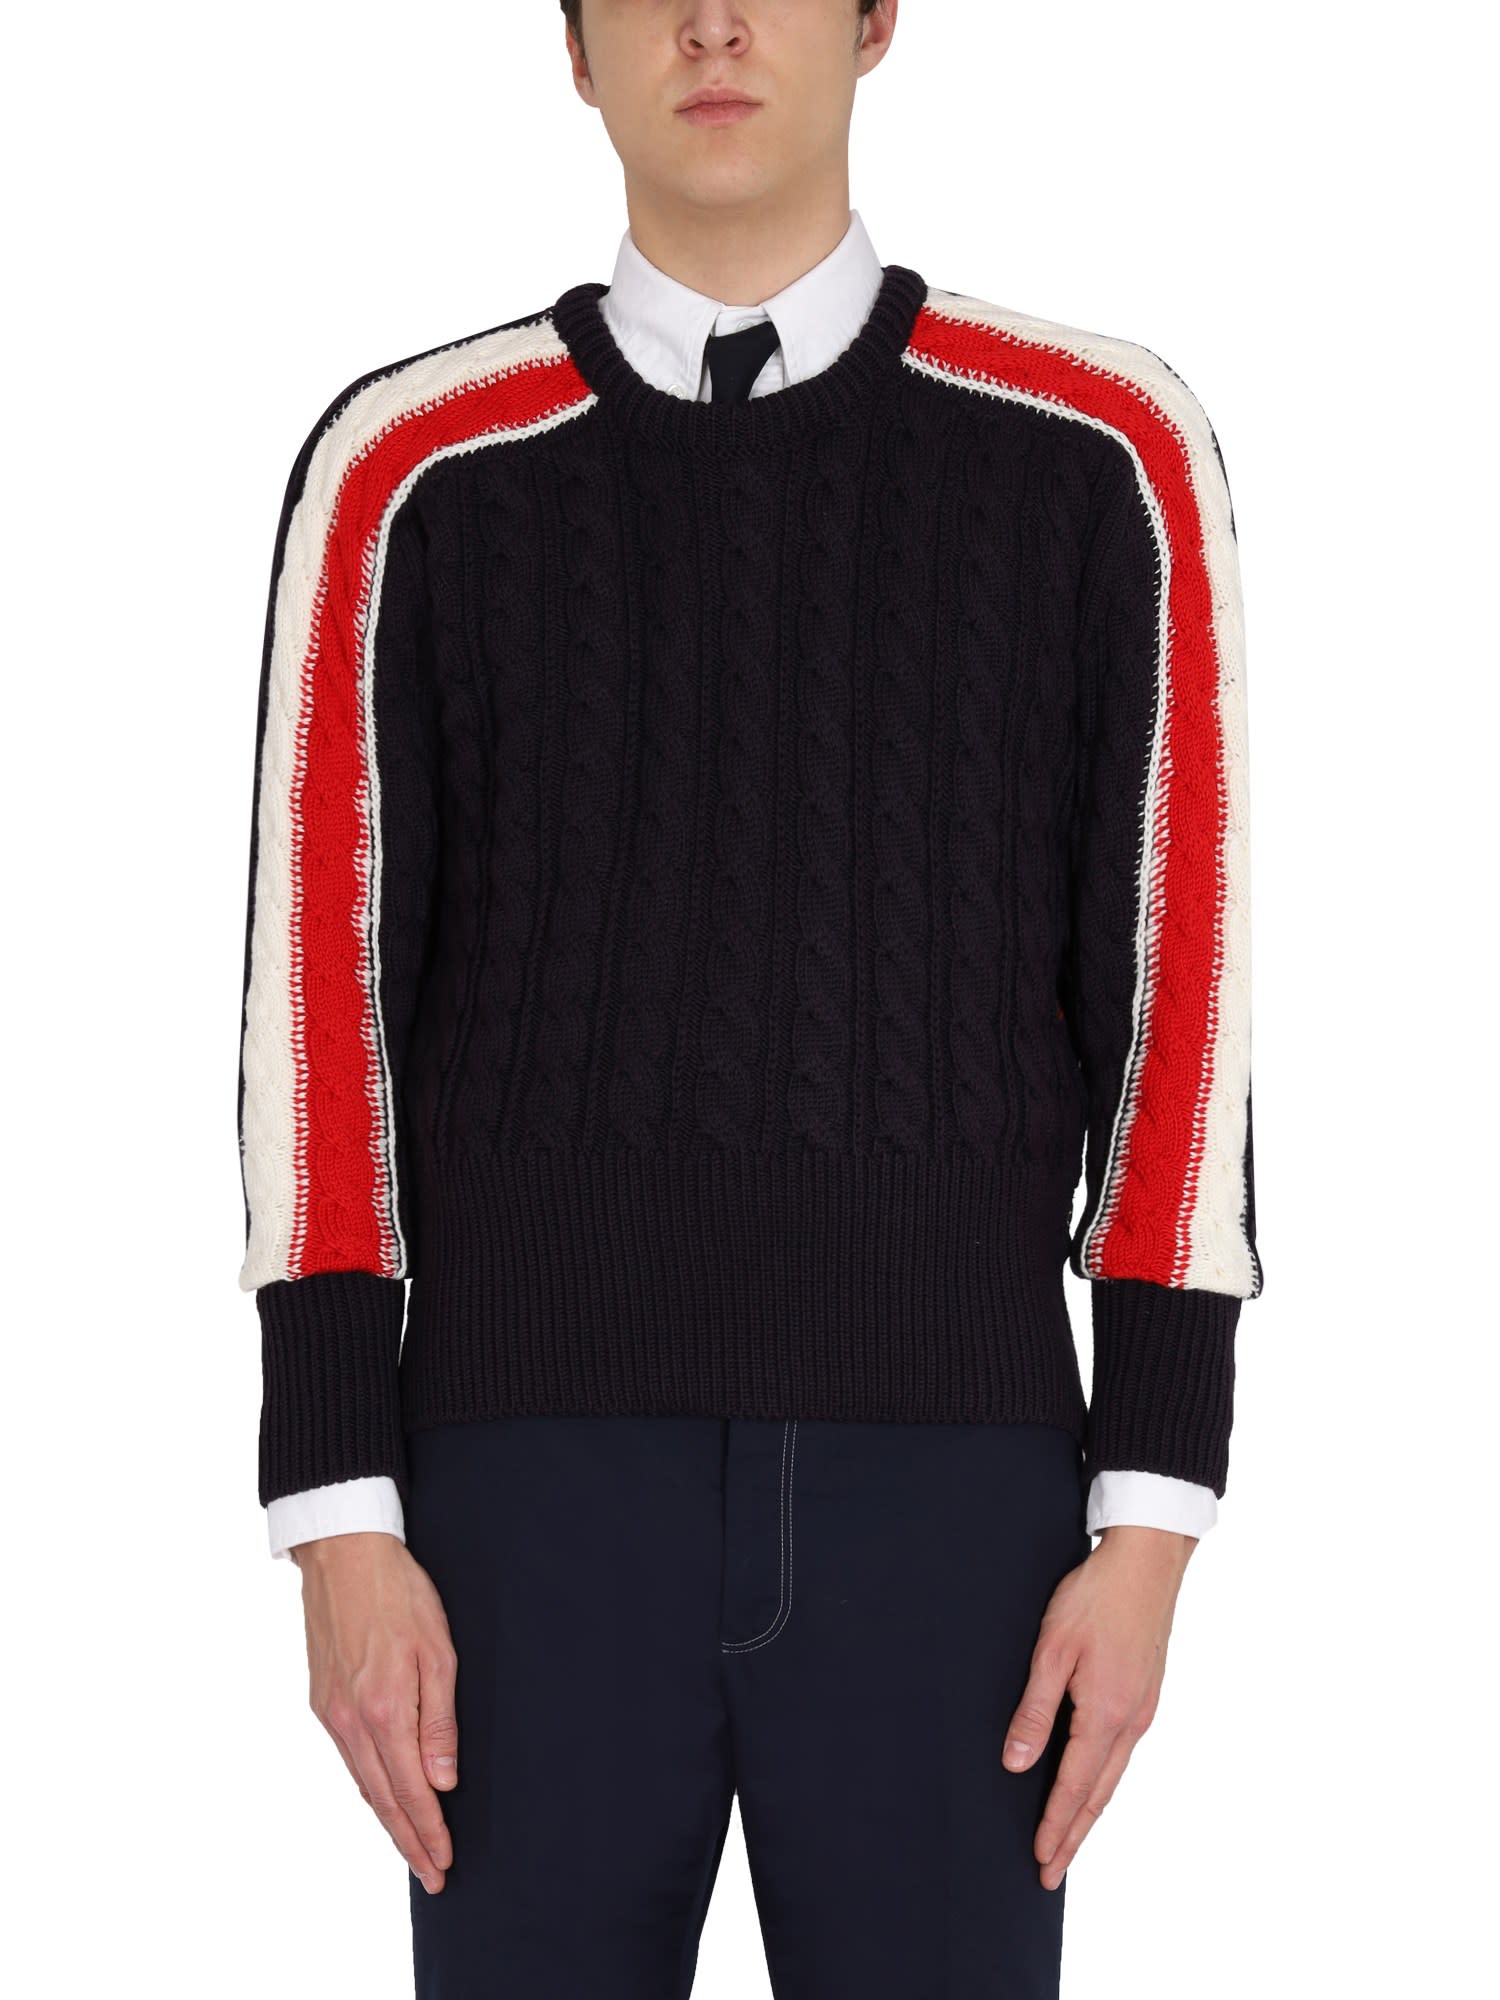 Thom Browne Iconic Band Sweater